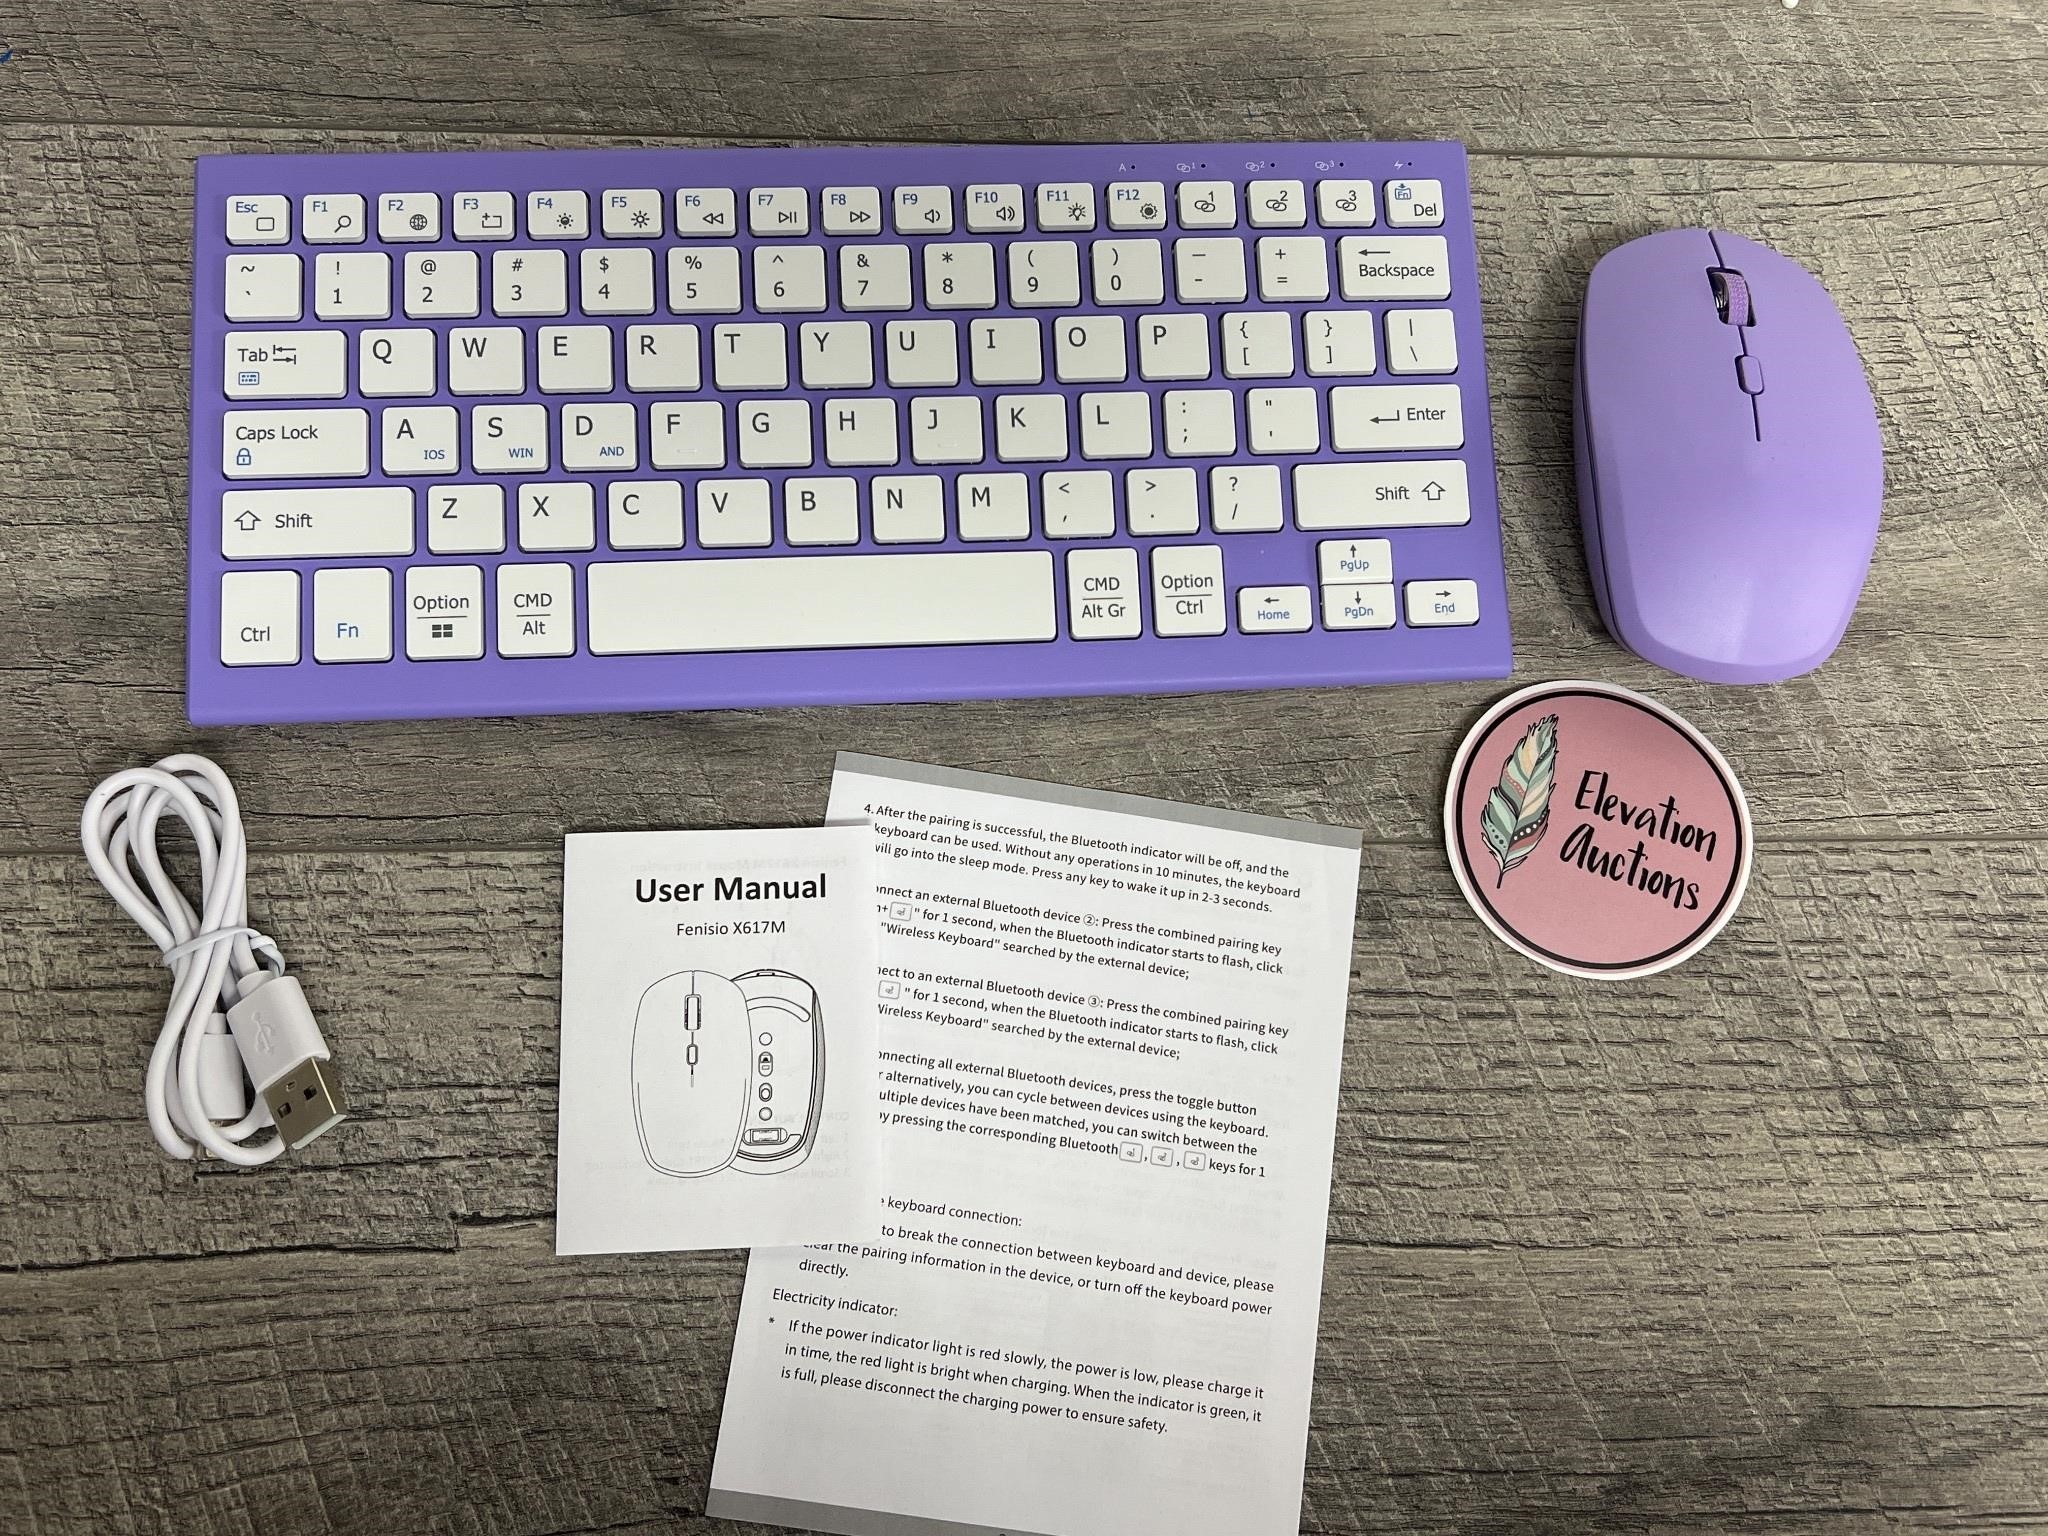 New wirelss mouse and keyboard in a cute purple